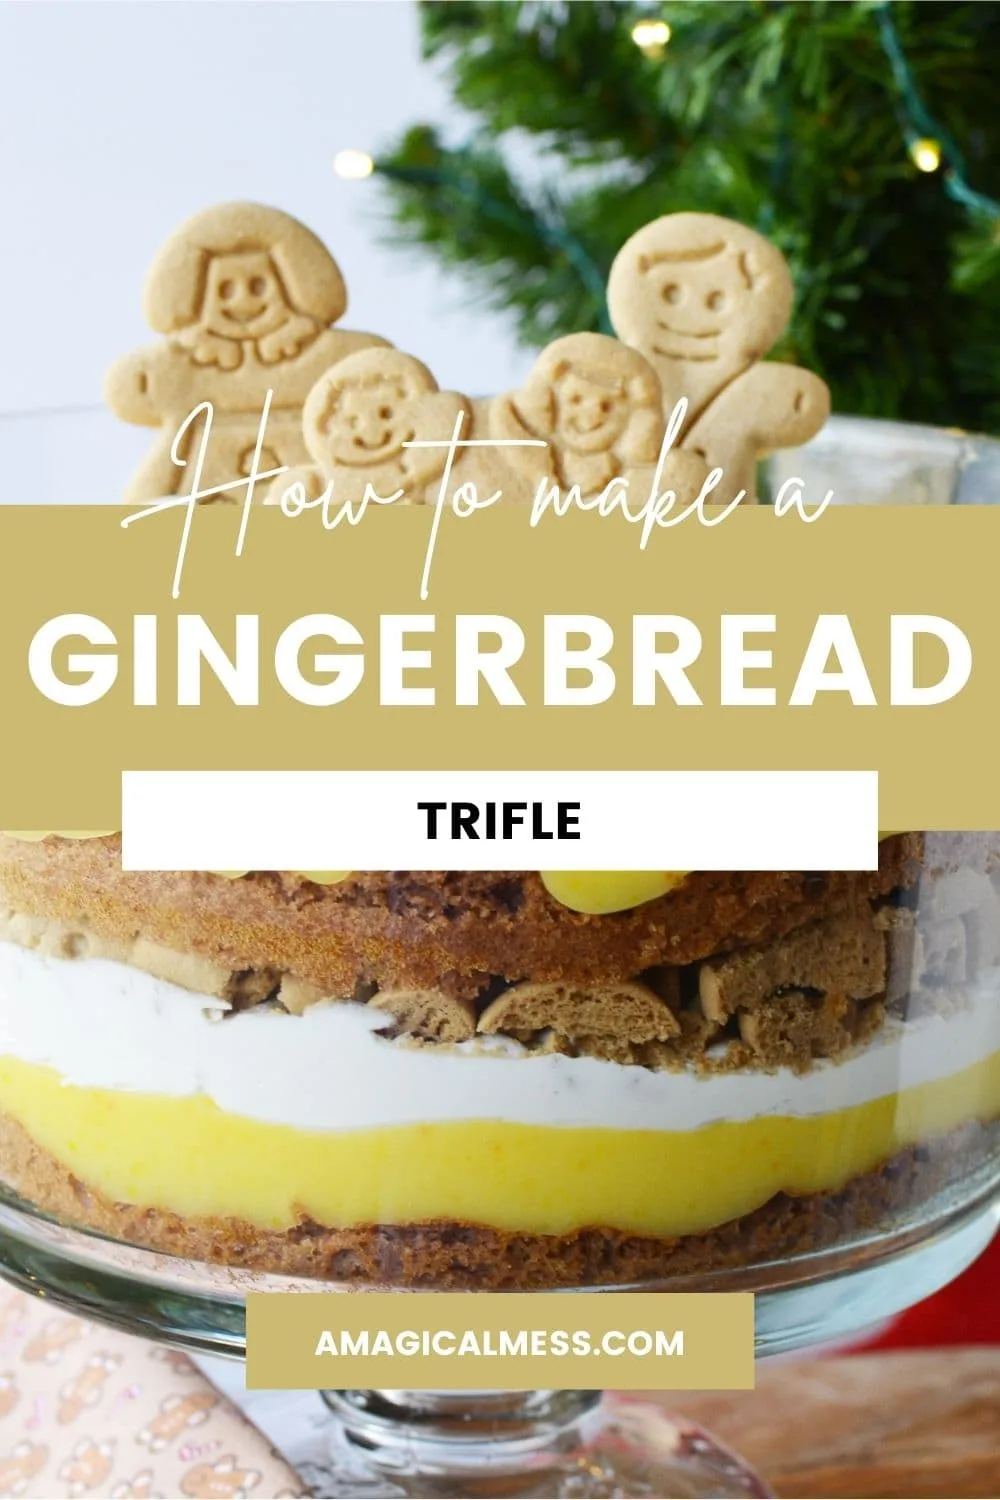 Gingerbread cookies in a layered trifle dessert.